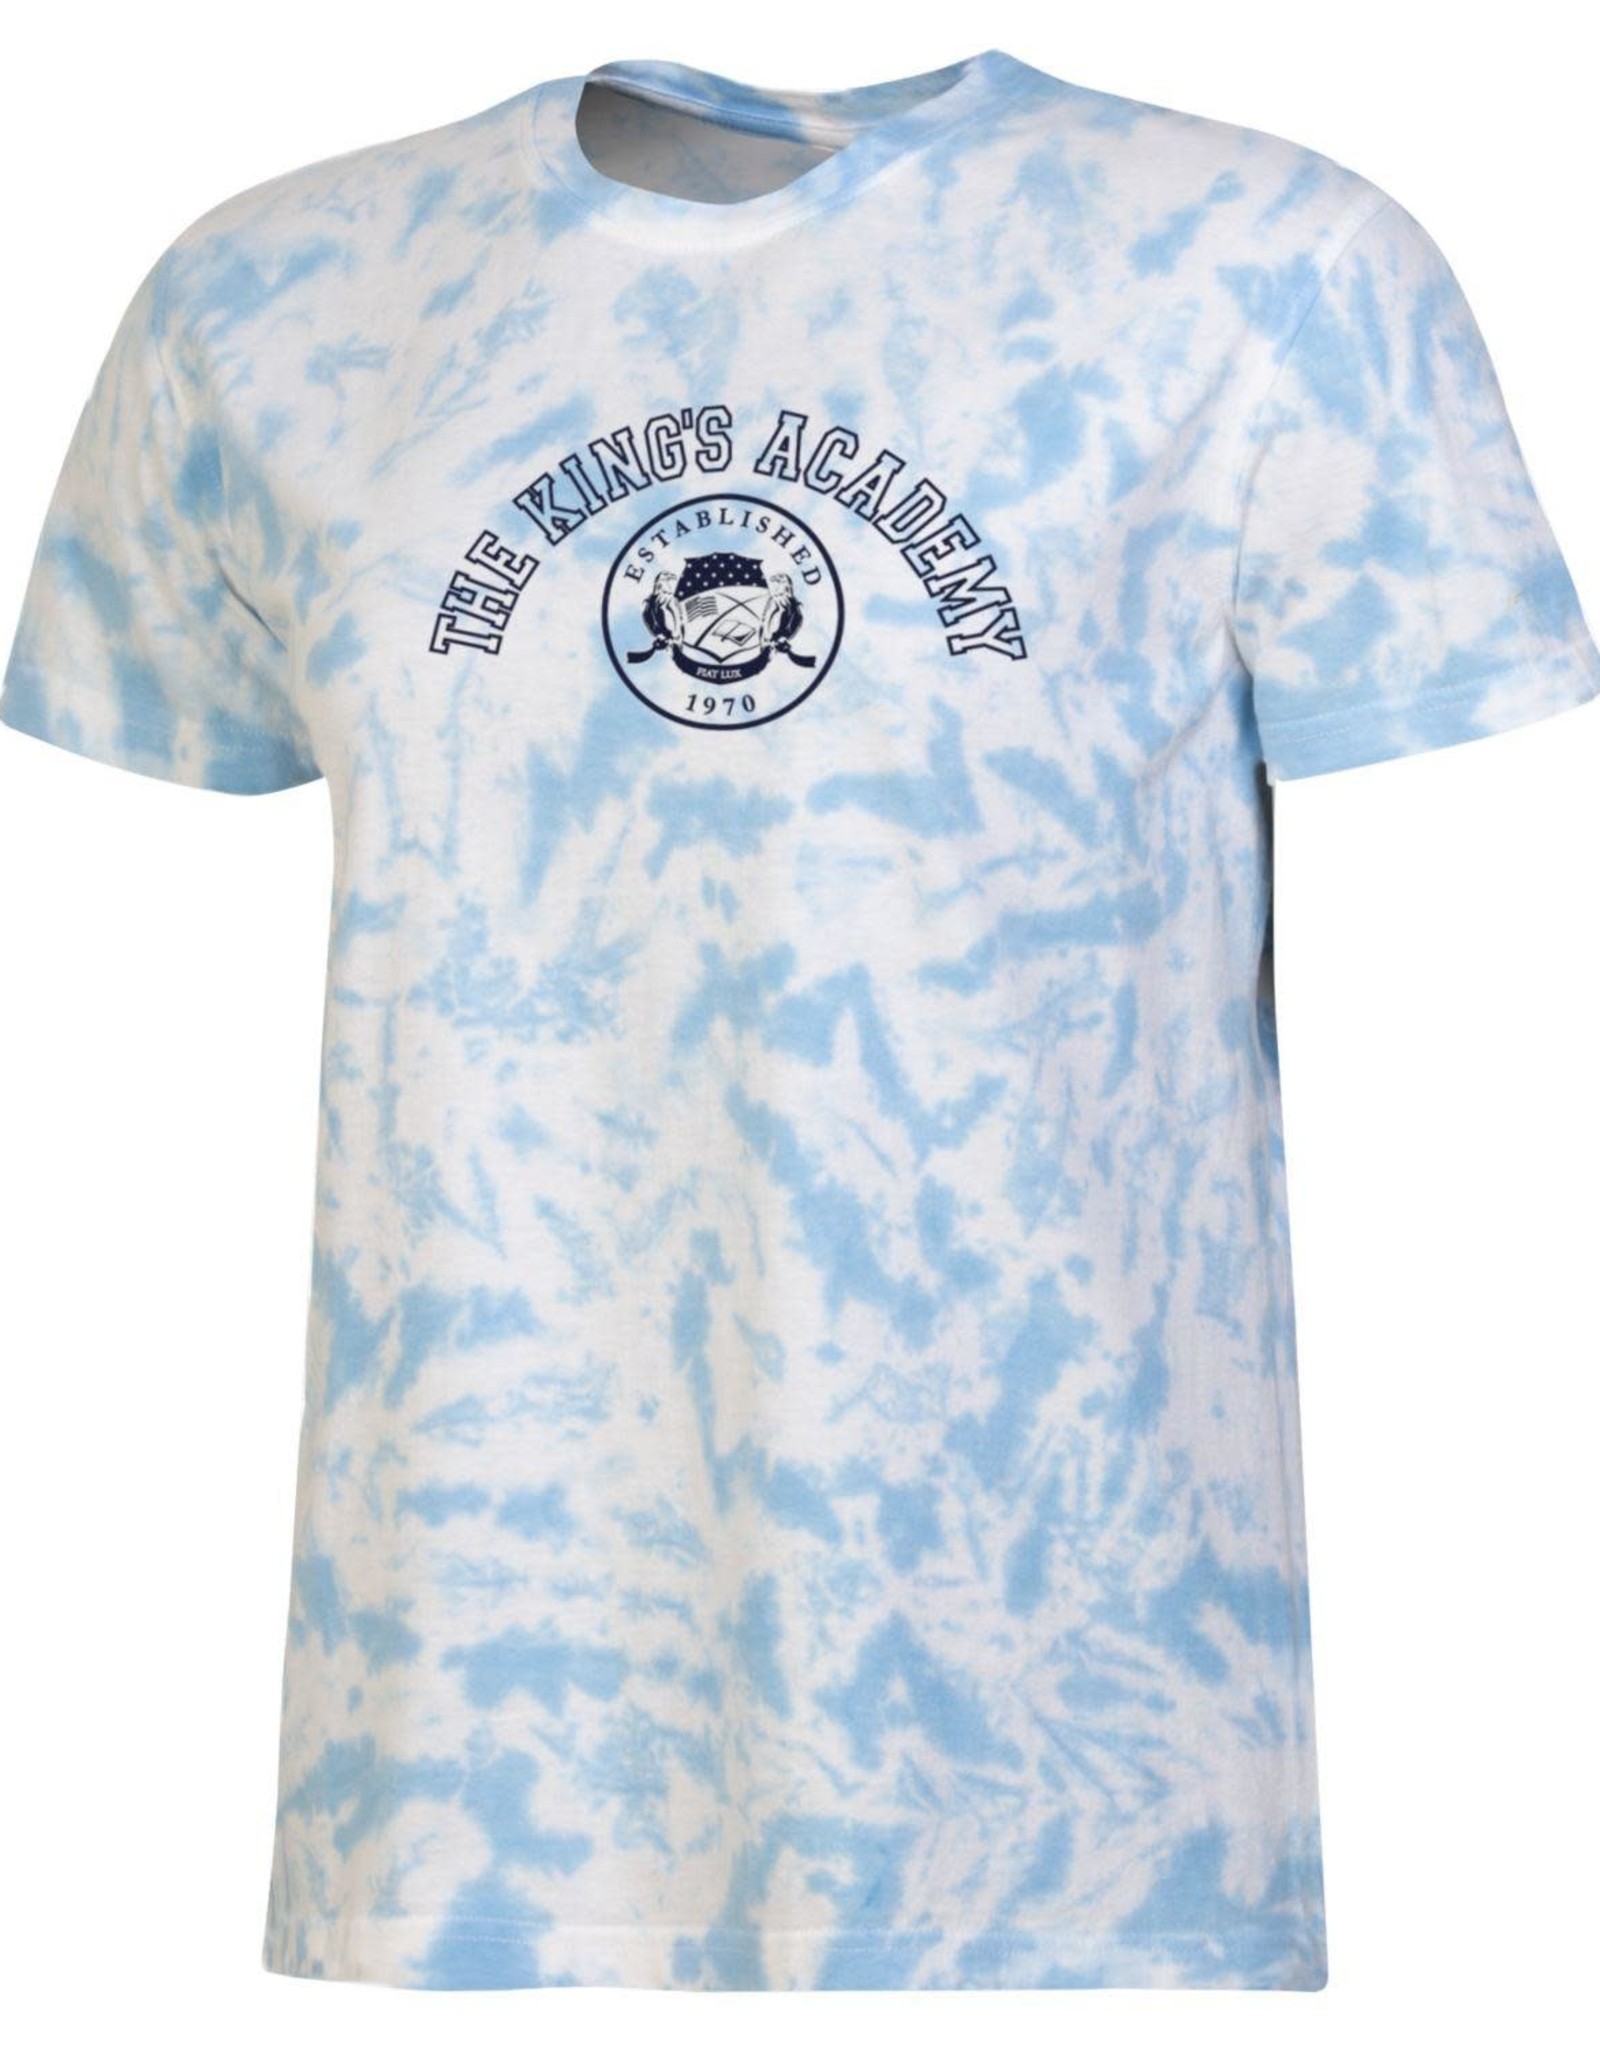 Gear for Sports Gear 2022 - Big Cotton Tie-Dye - The King's Academy Over Crest - Light Blue